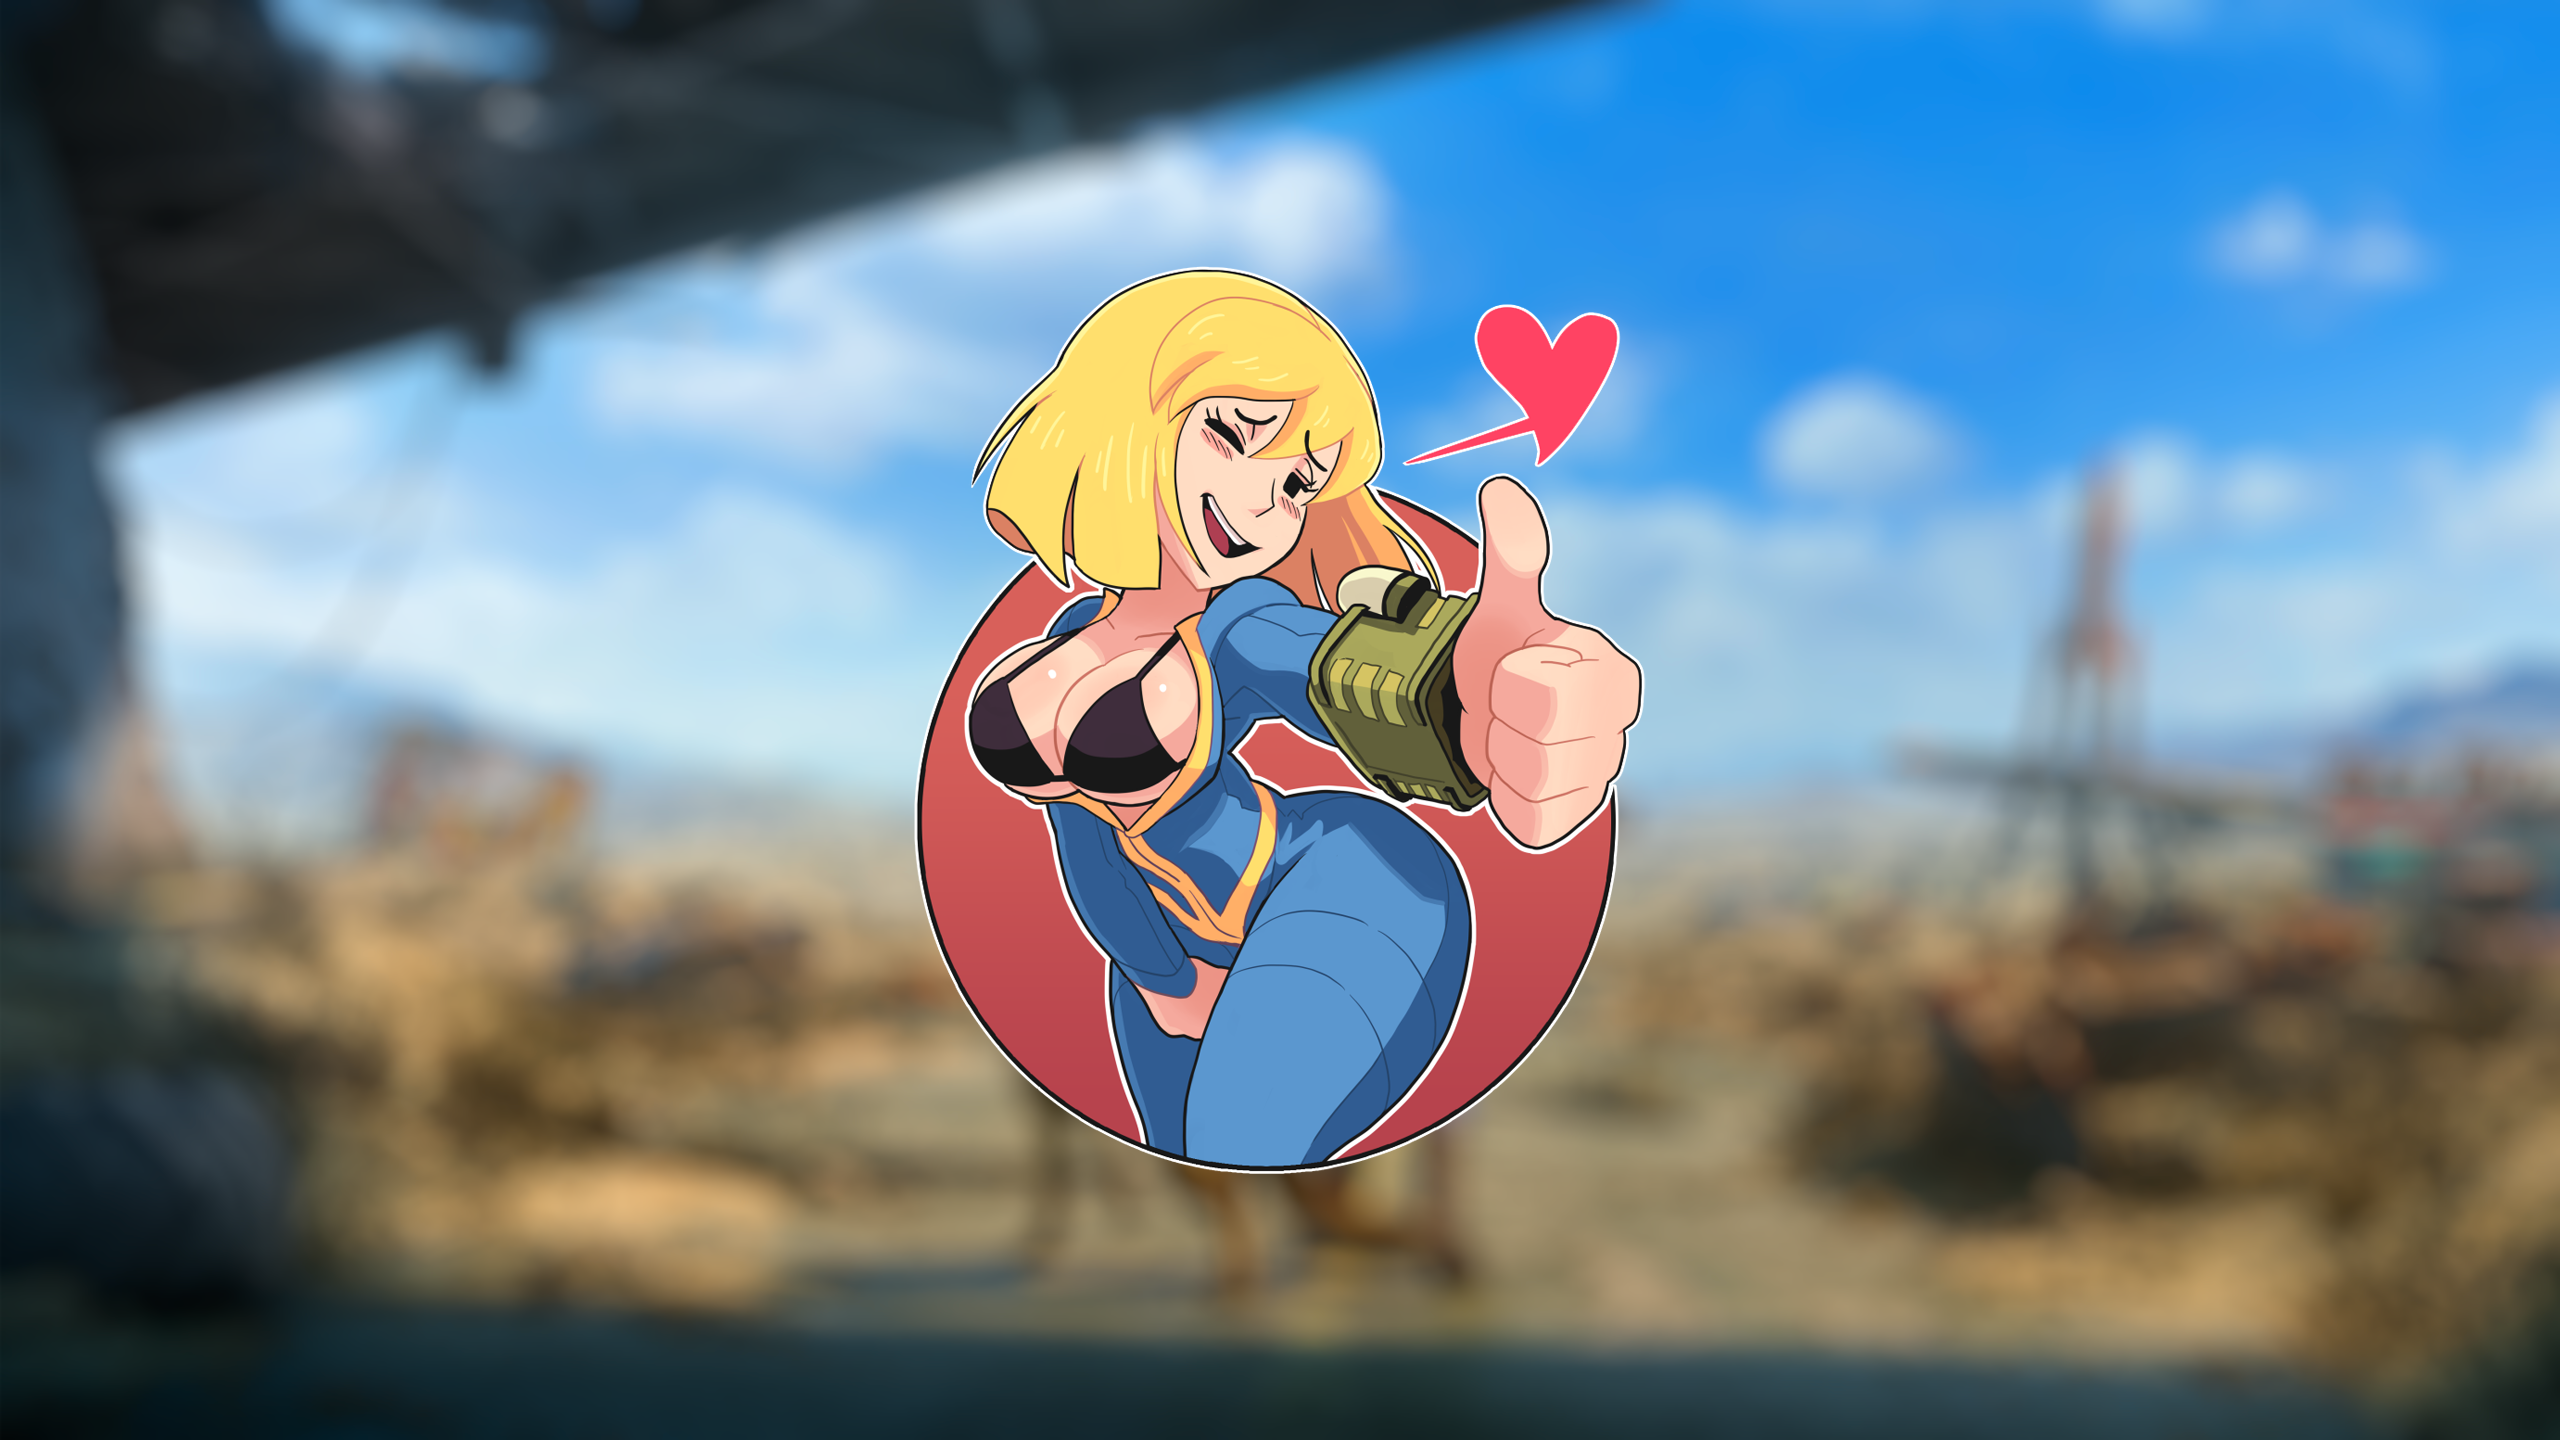 General 2560x1440 boobs Fallout Fallout 4 cleavage vault girl Shadbase big boobs blonde heart (design) smiling video games PC gaming